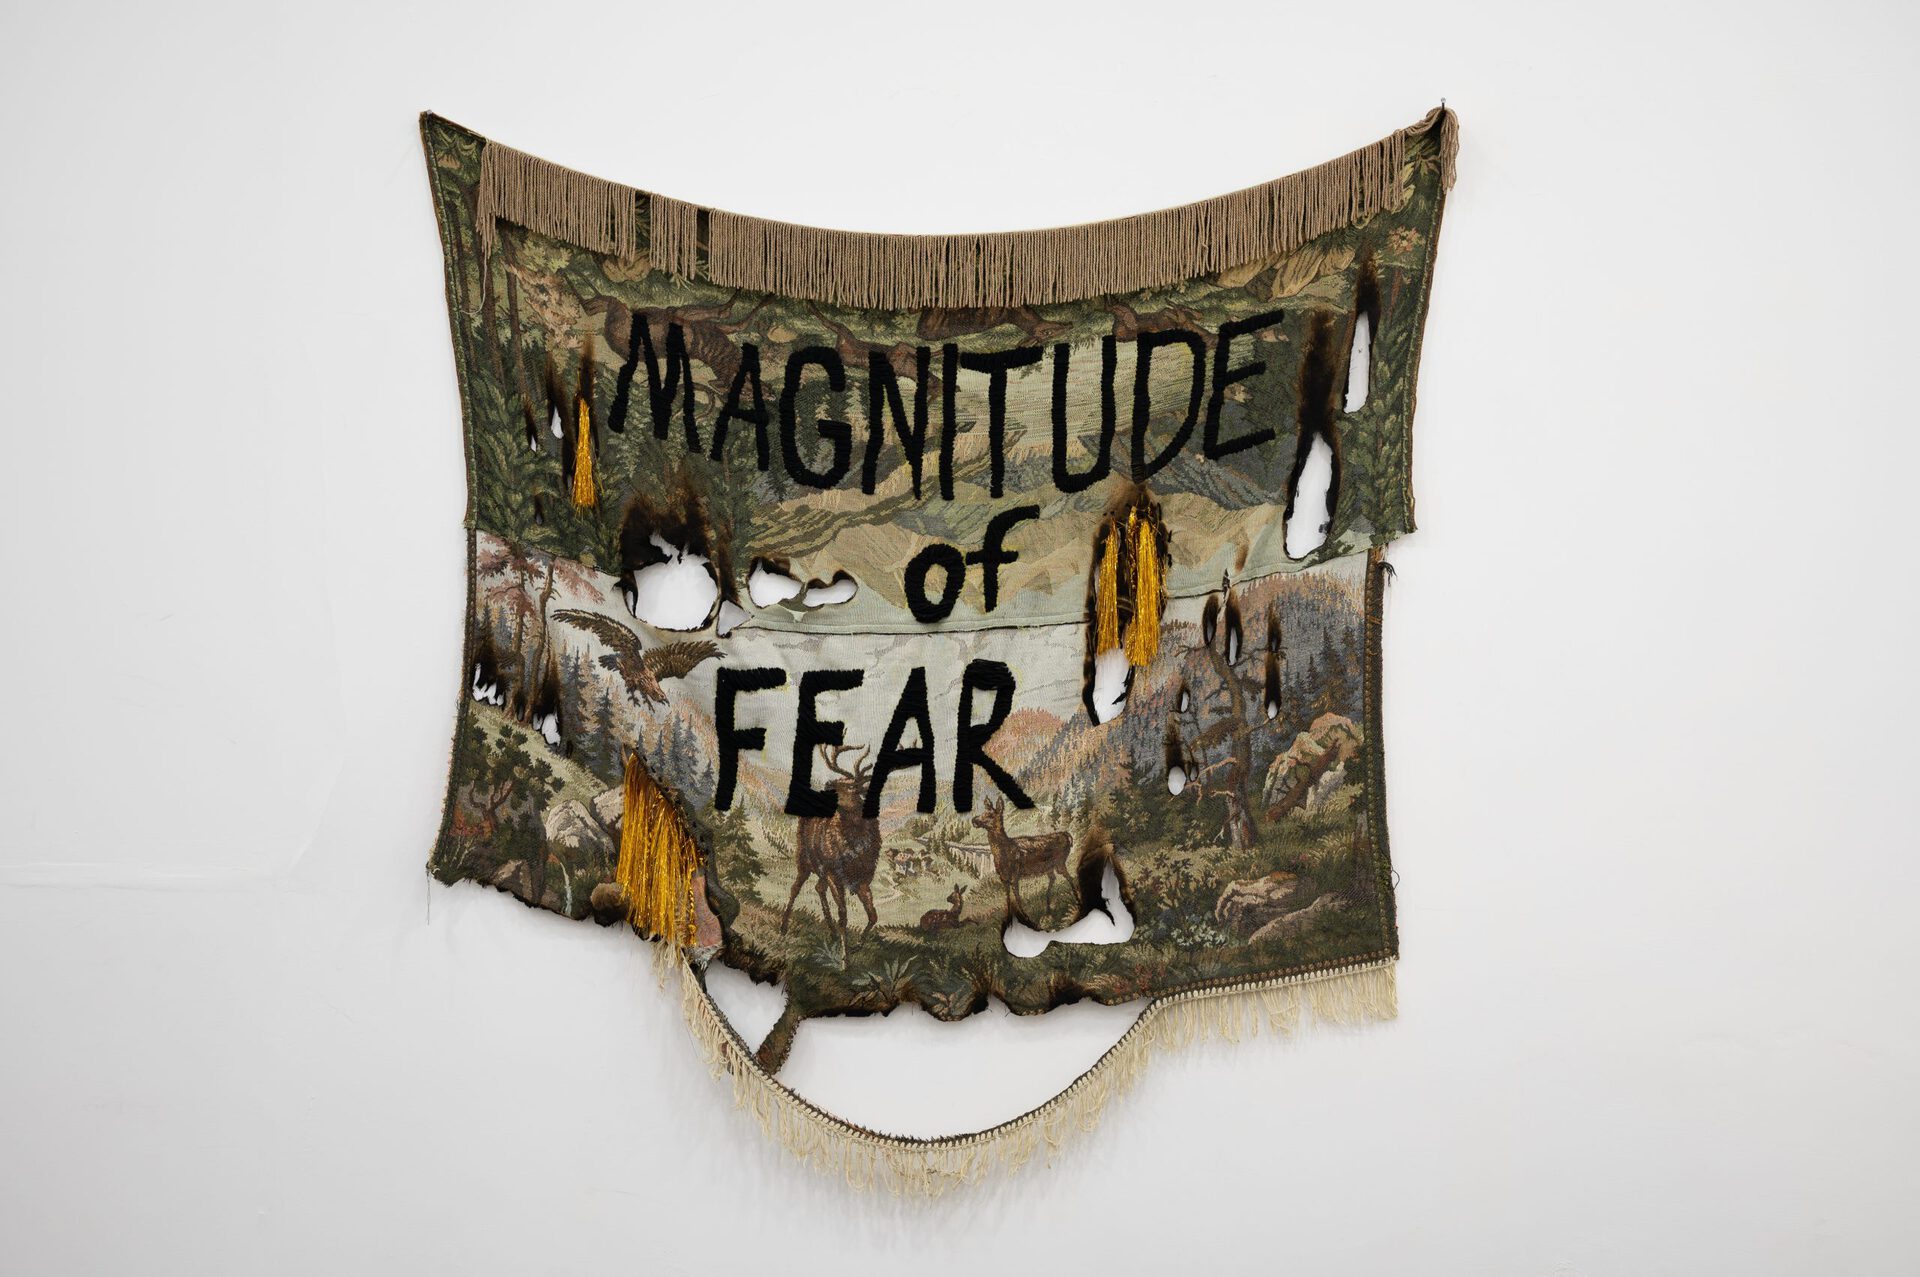 Gvantsa Jishkariani, Magnitude of Fear, 2022,Embroidery on reworked and burnt vintage Soviet period tapestry with golden fringes. 120 x 150 cm